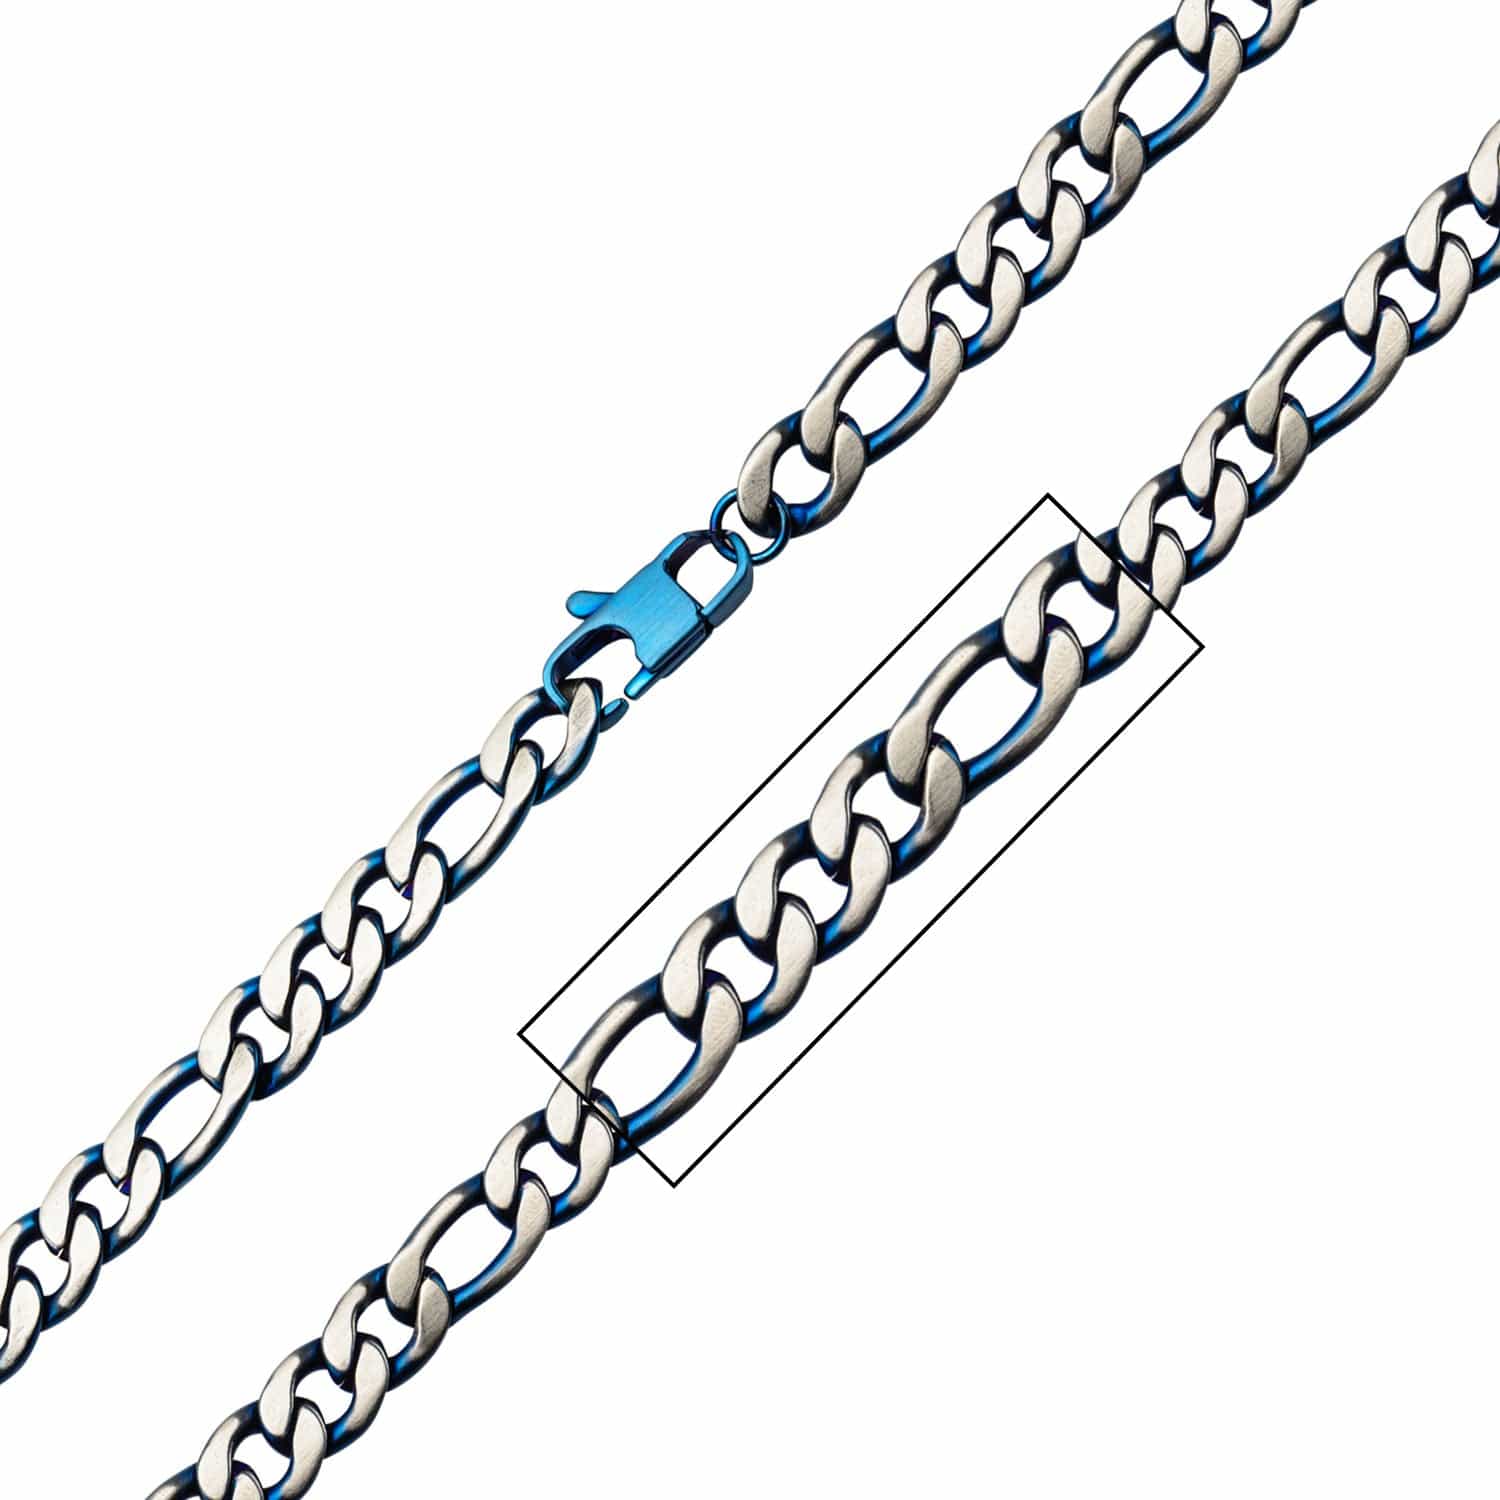 INOX JEWELRY Chains Blue and Silver Tone Stainless Steel Solemn Jewelry Collection 3mm Figaro Link Chain NSTC7628B-24